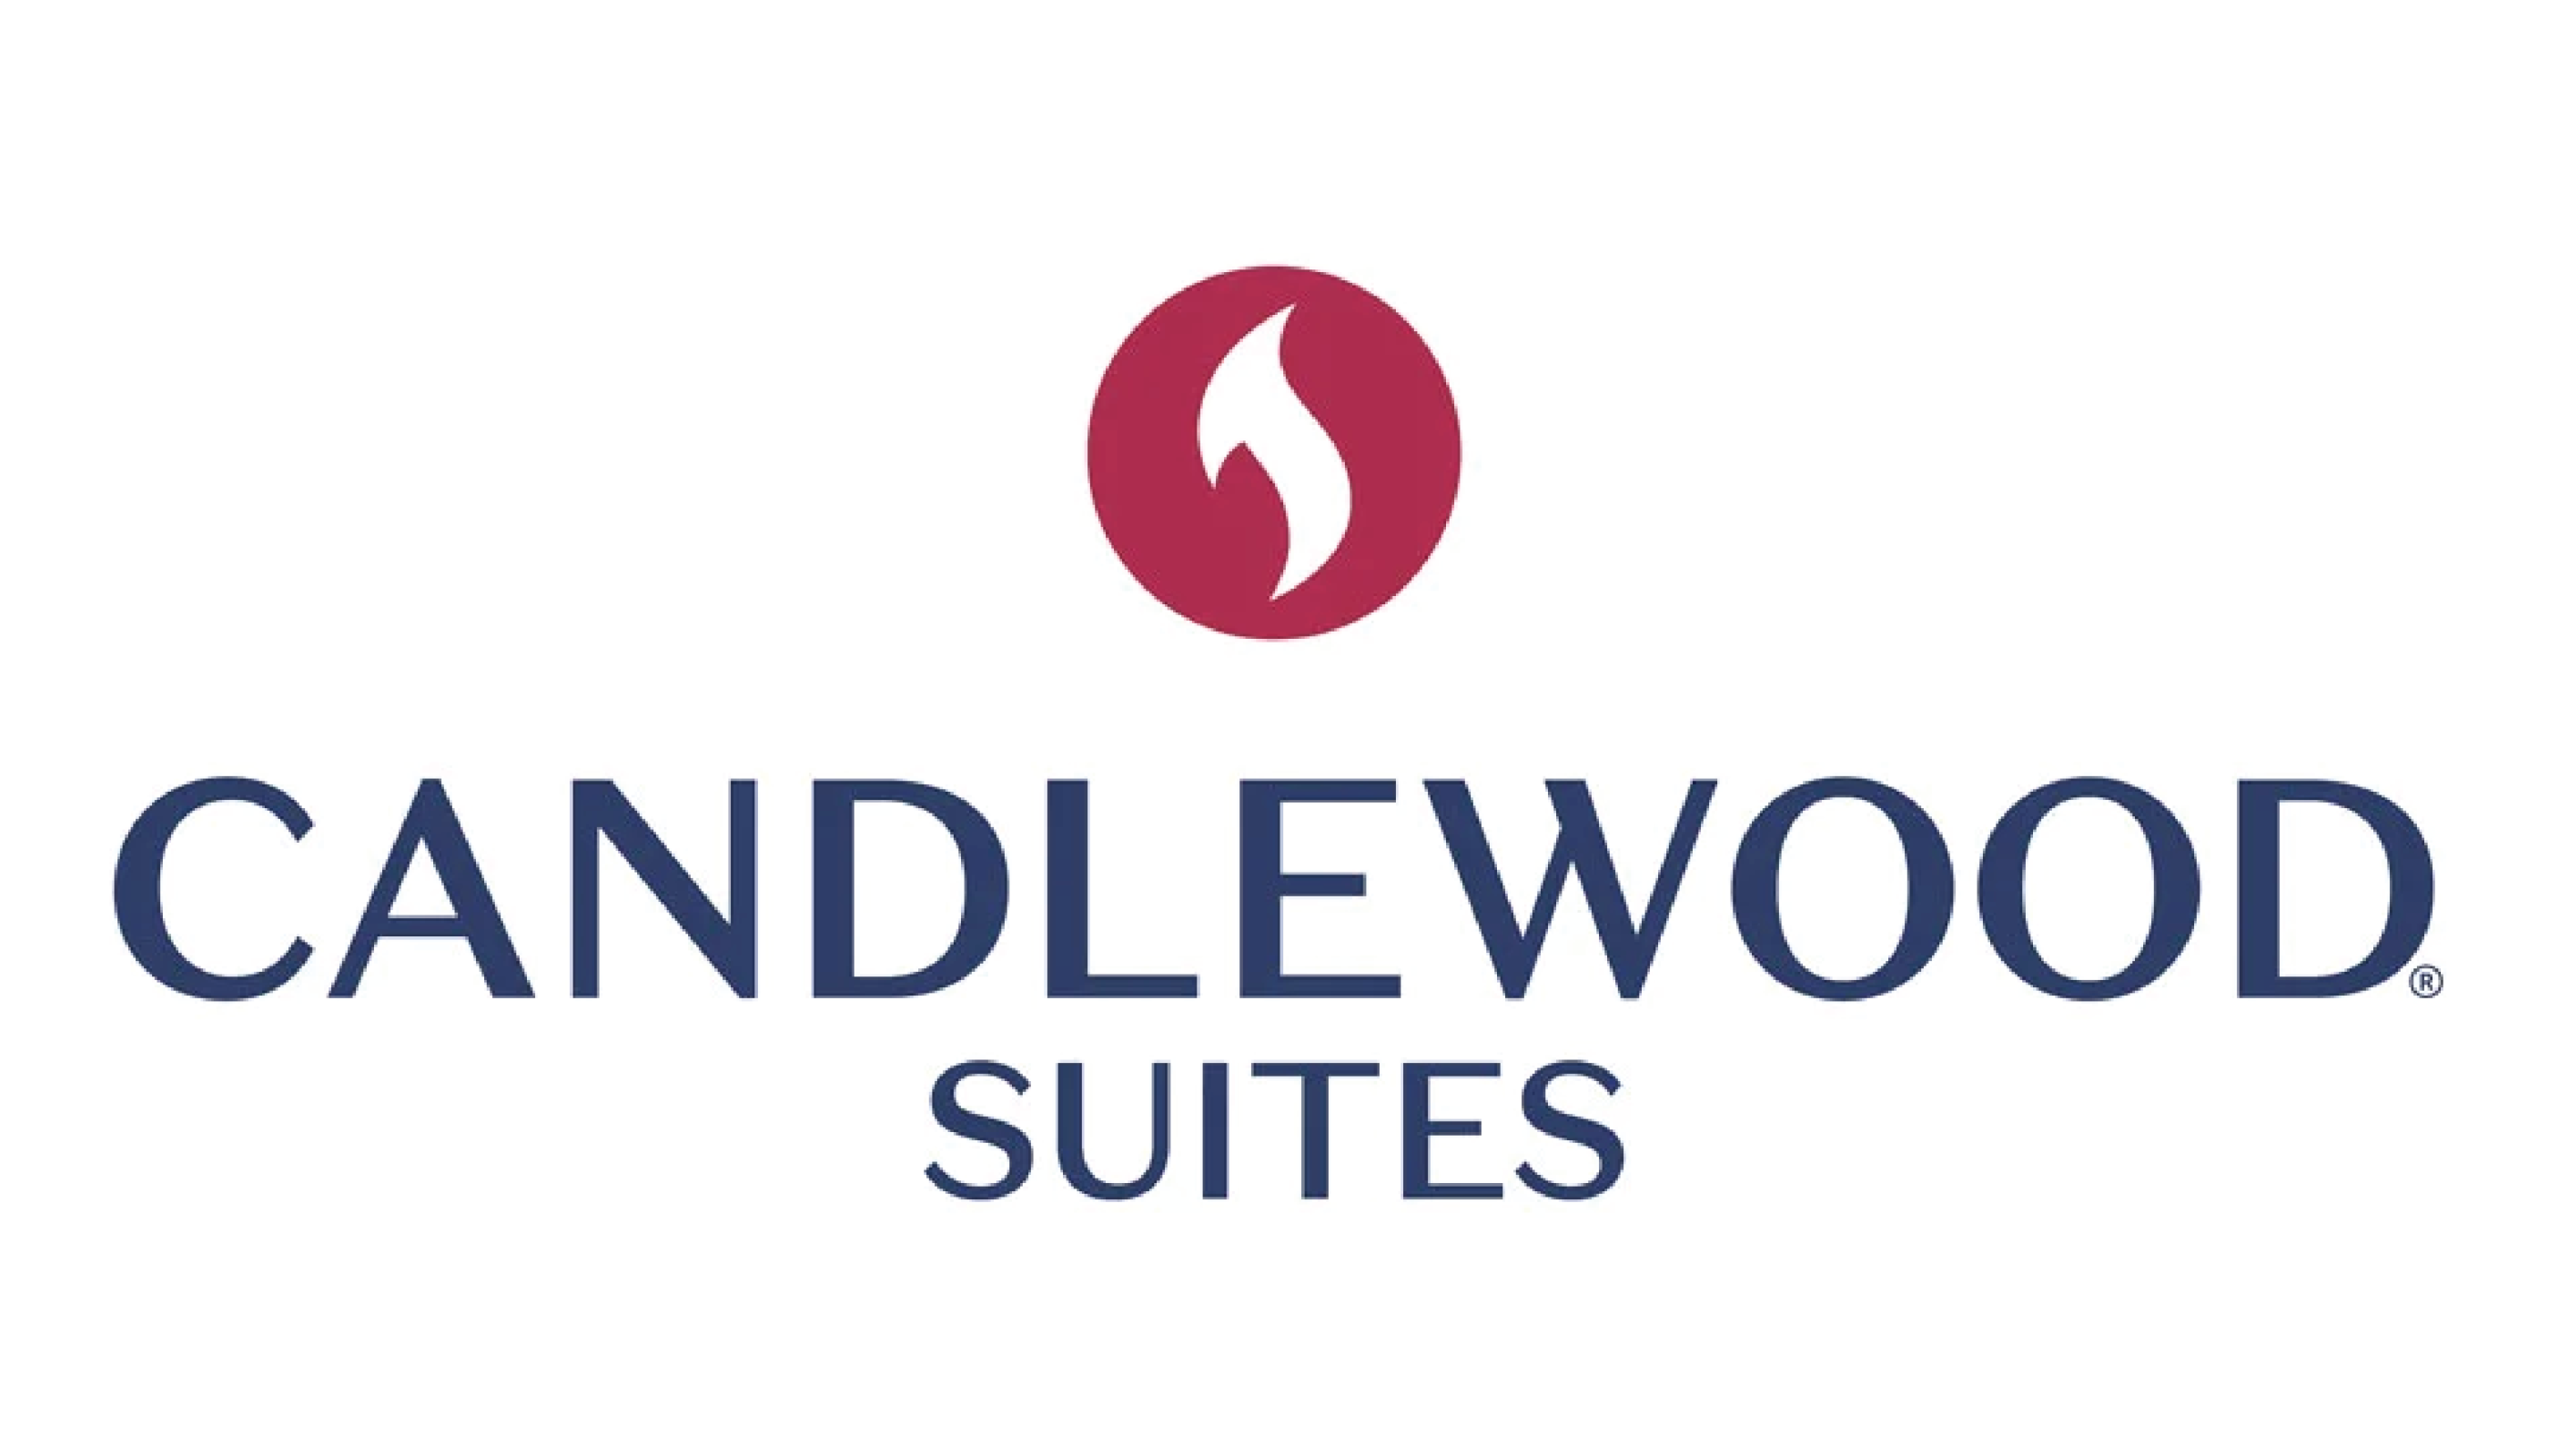 Candlewood Suites's Image